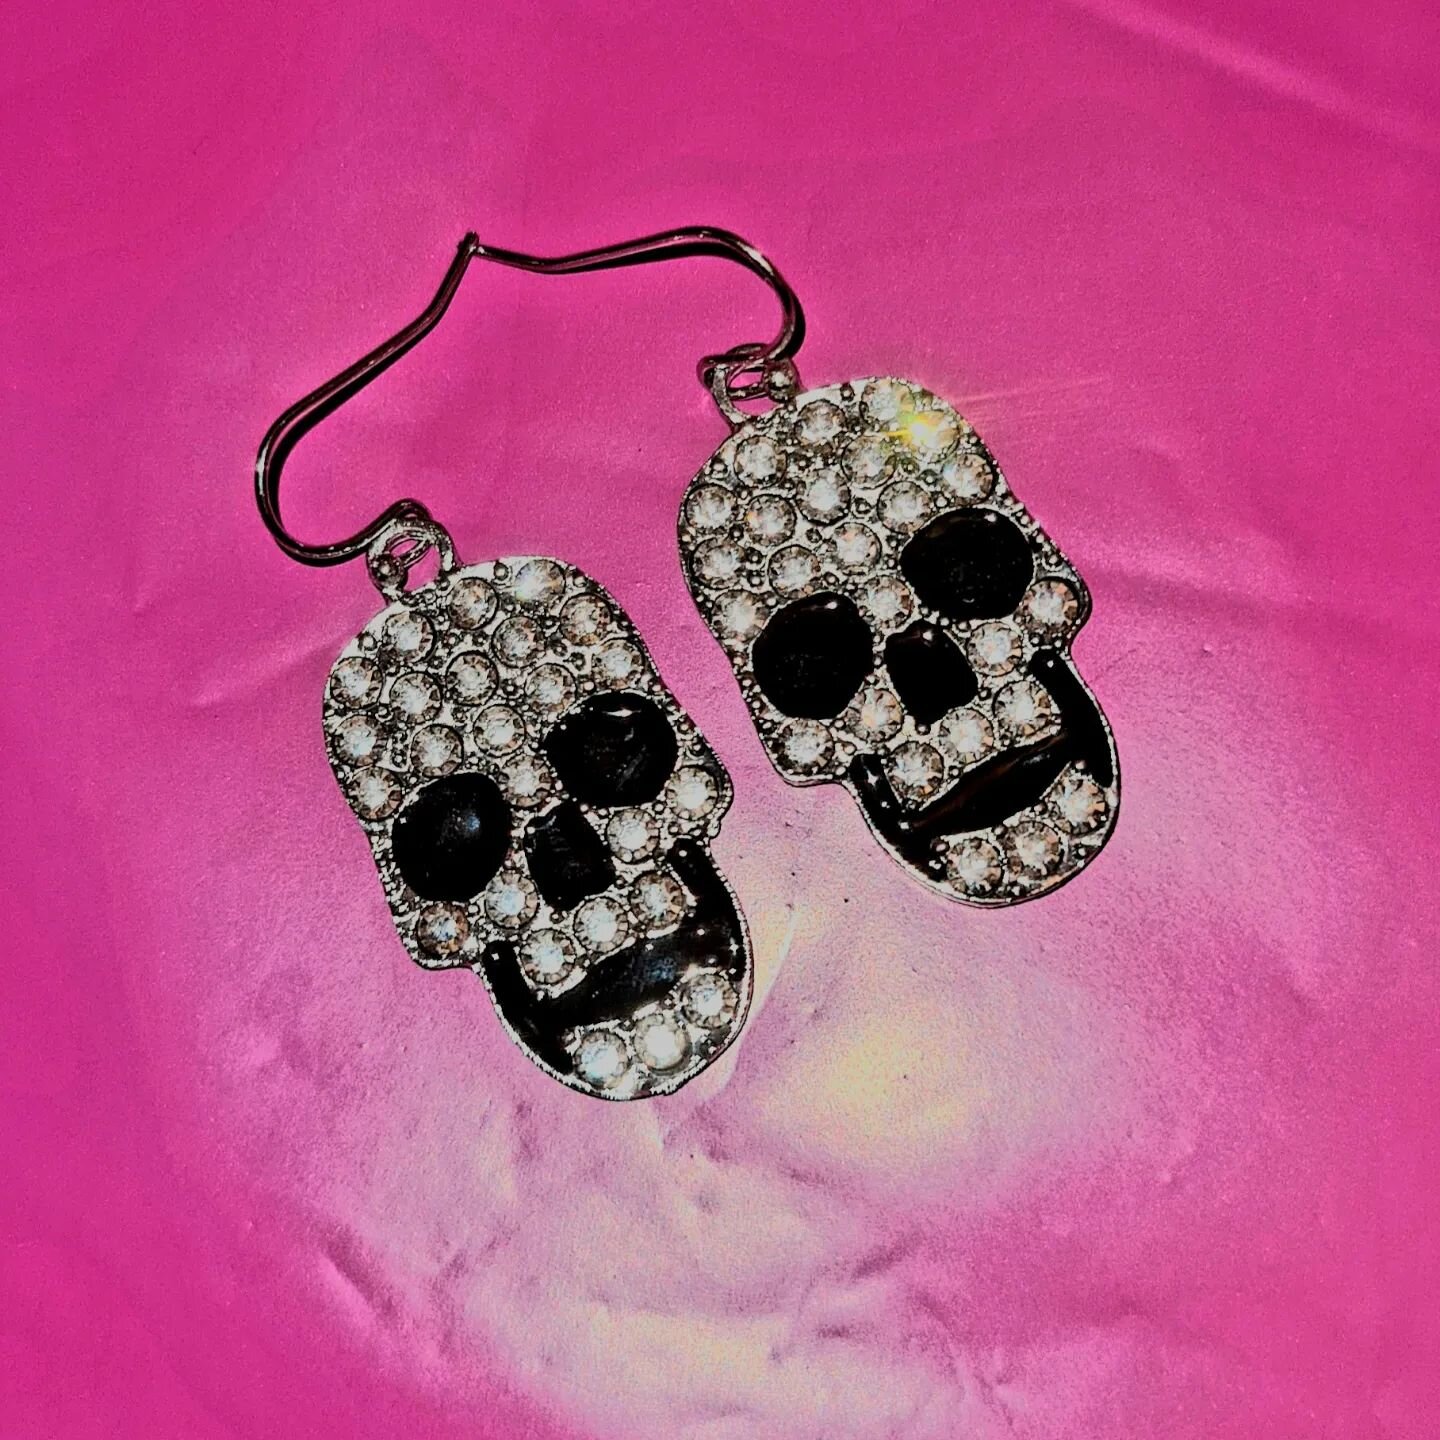 Diamant&eacute; Skull Earings 
Now available online at www.thepixieboutique.co.uk